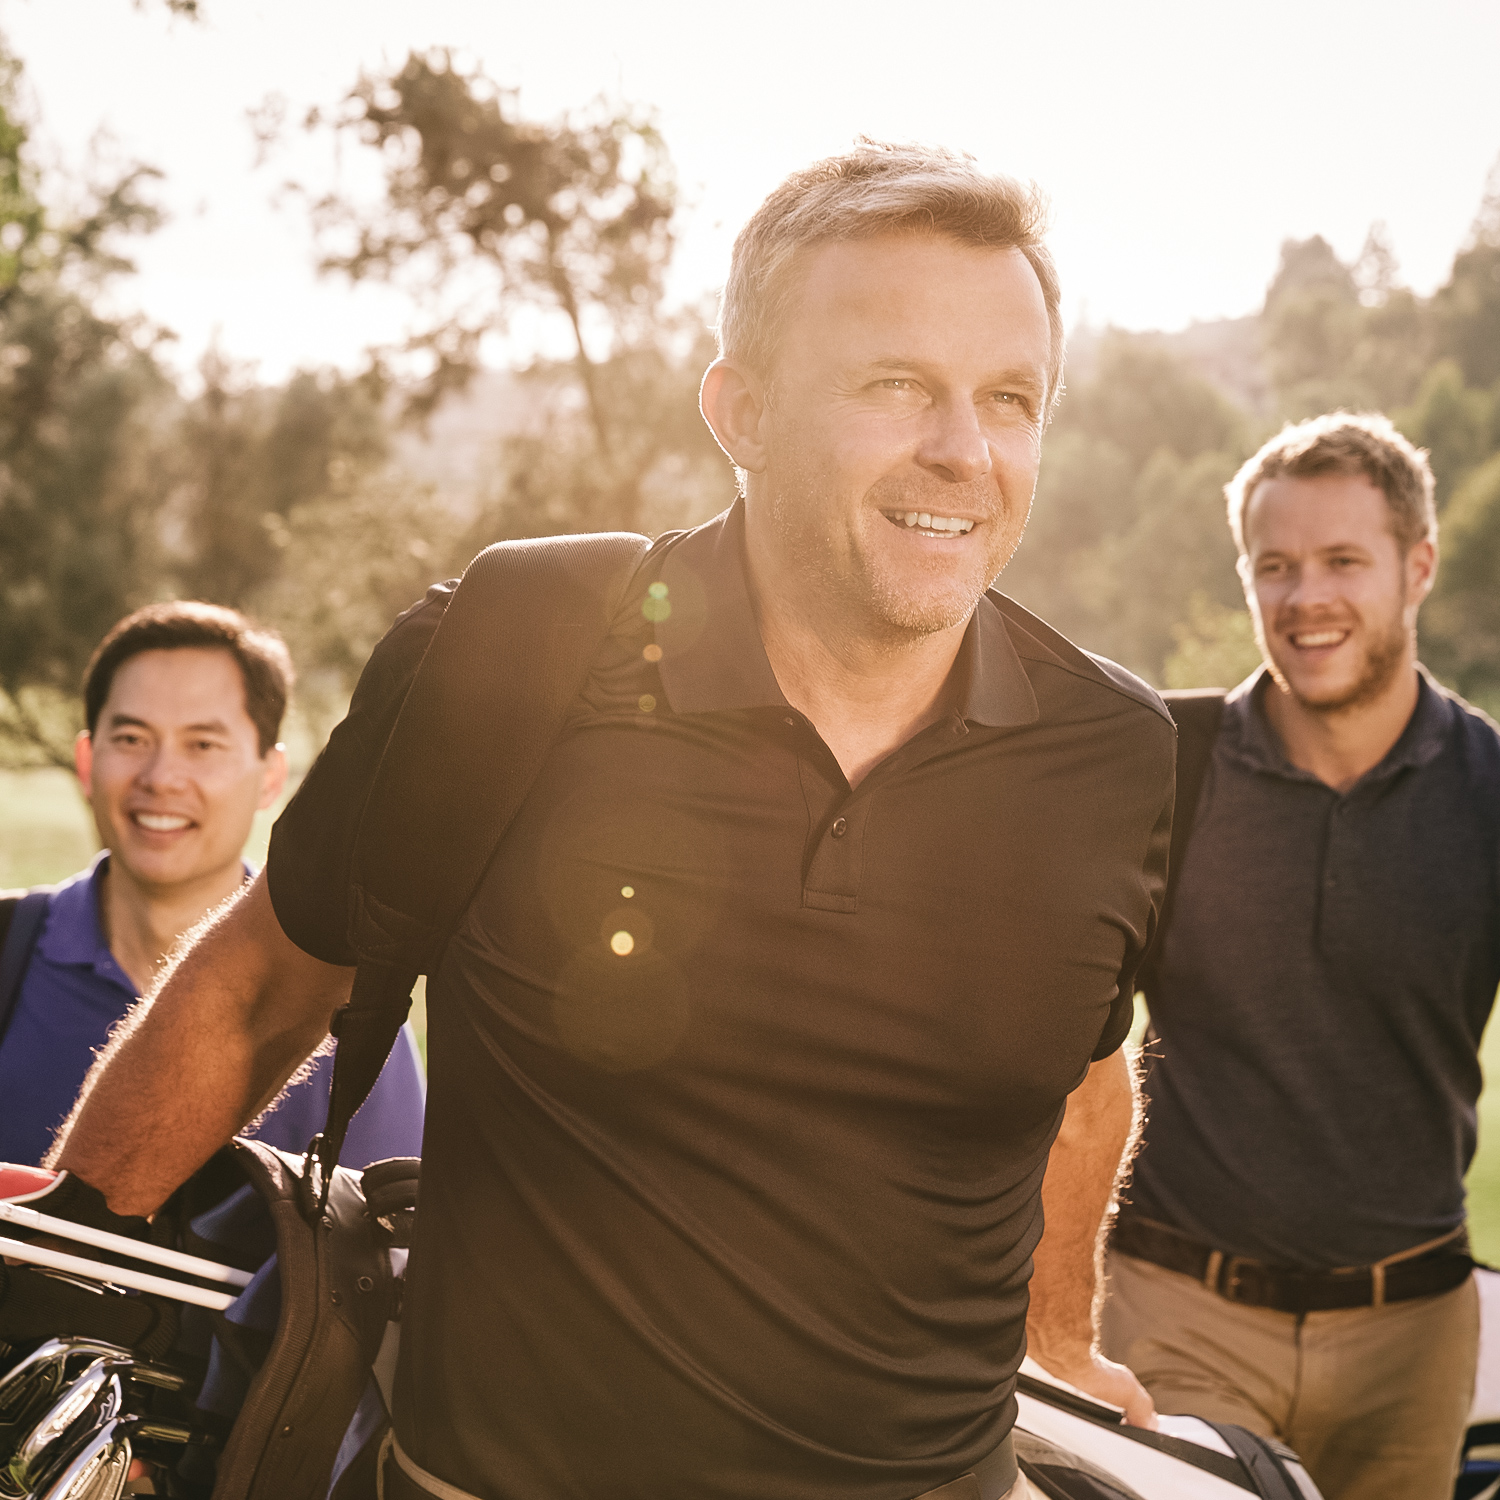 Your Golf Day Create a memorable client experience